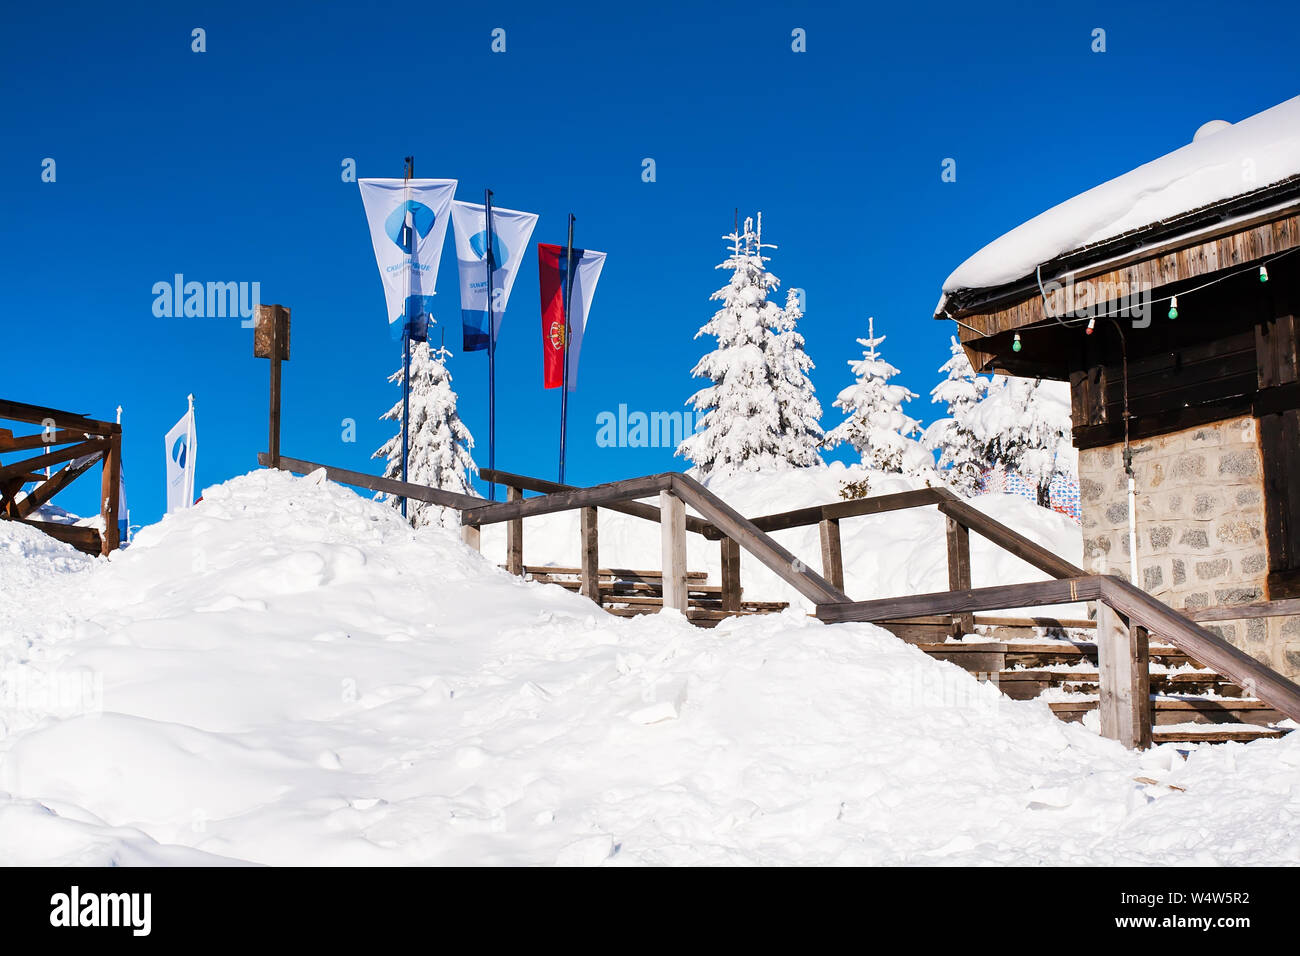 Kopaonik, Serbia - January 19, 2016: Serbian and ski resort flags on snowy mountain with trees background Stock Photo